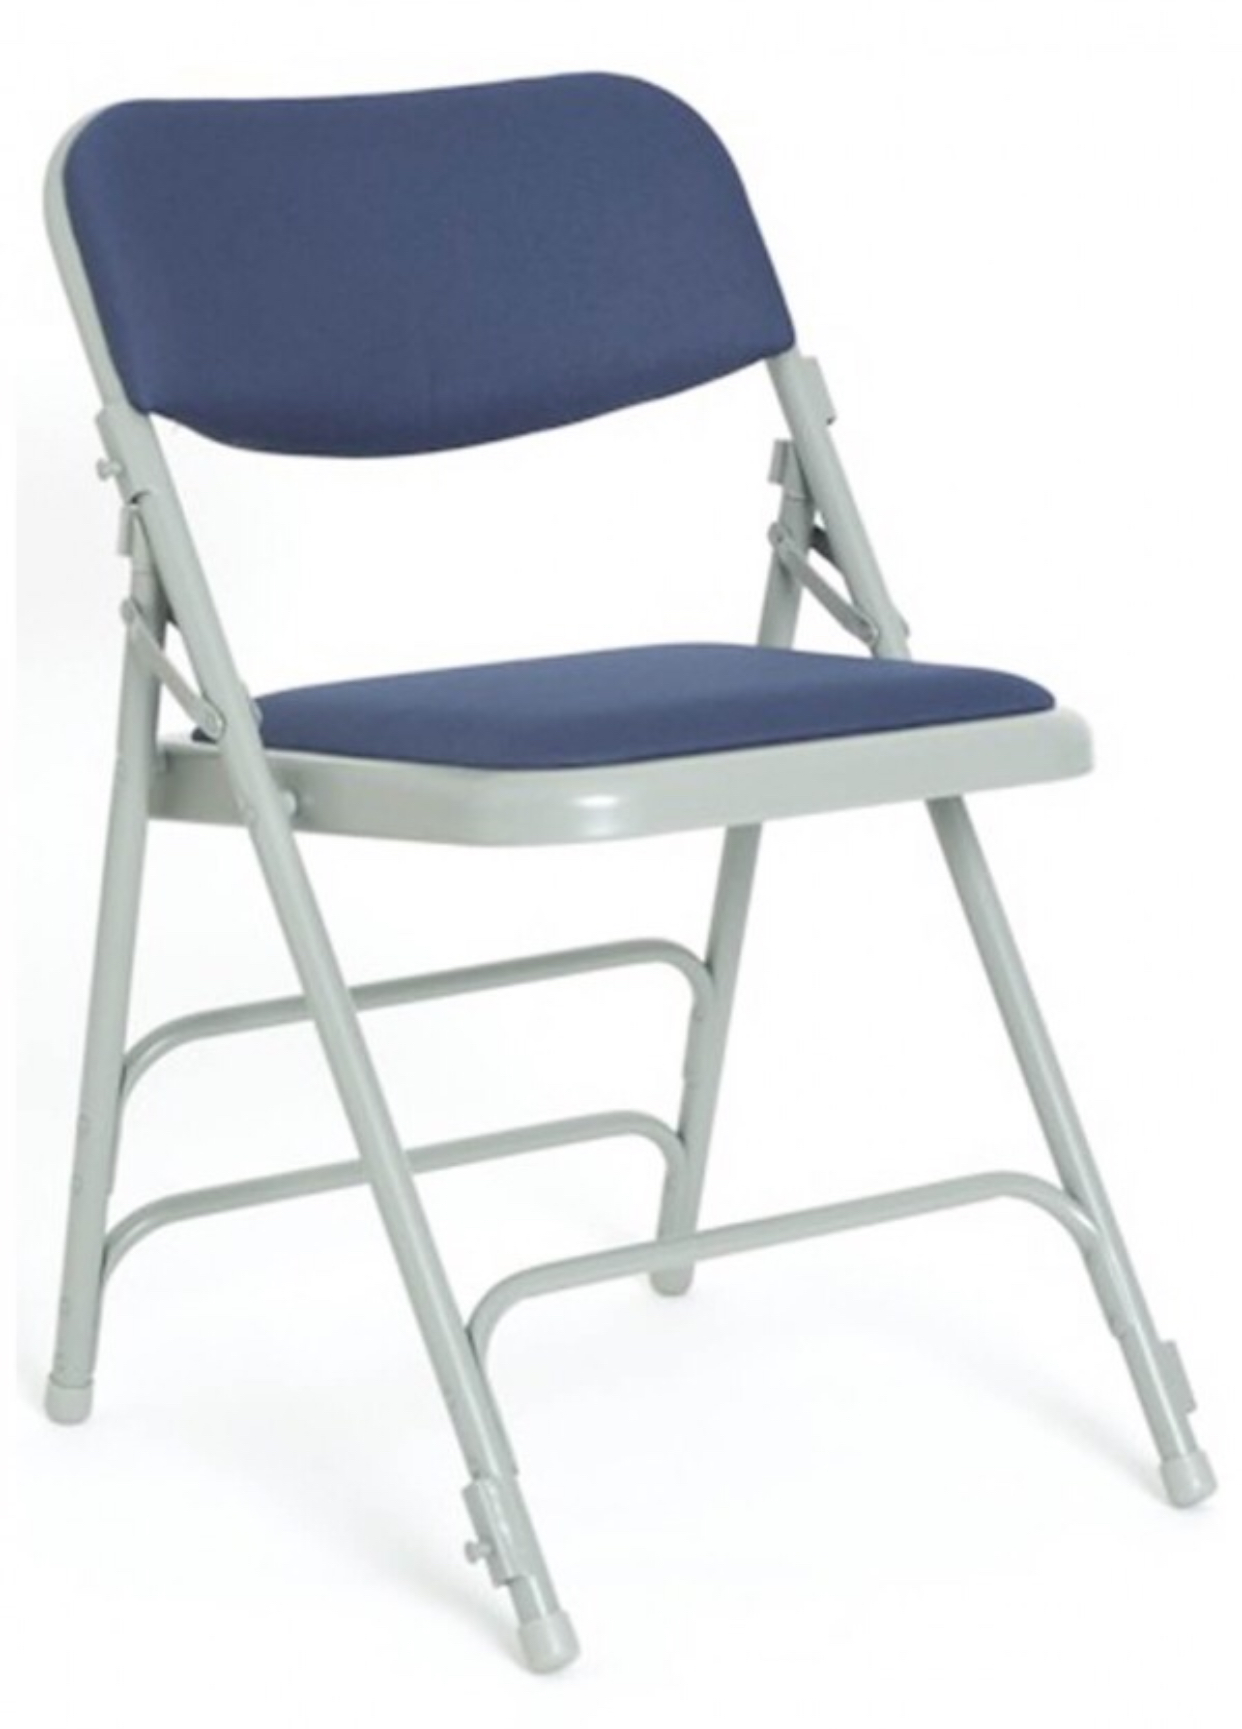 Folding padded seat and back chair. Blue 